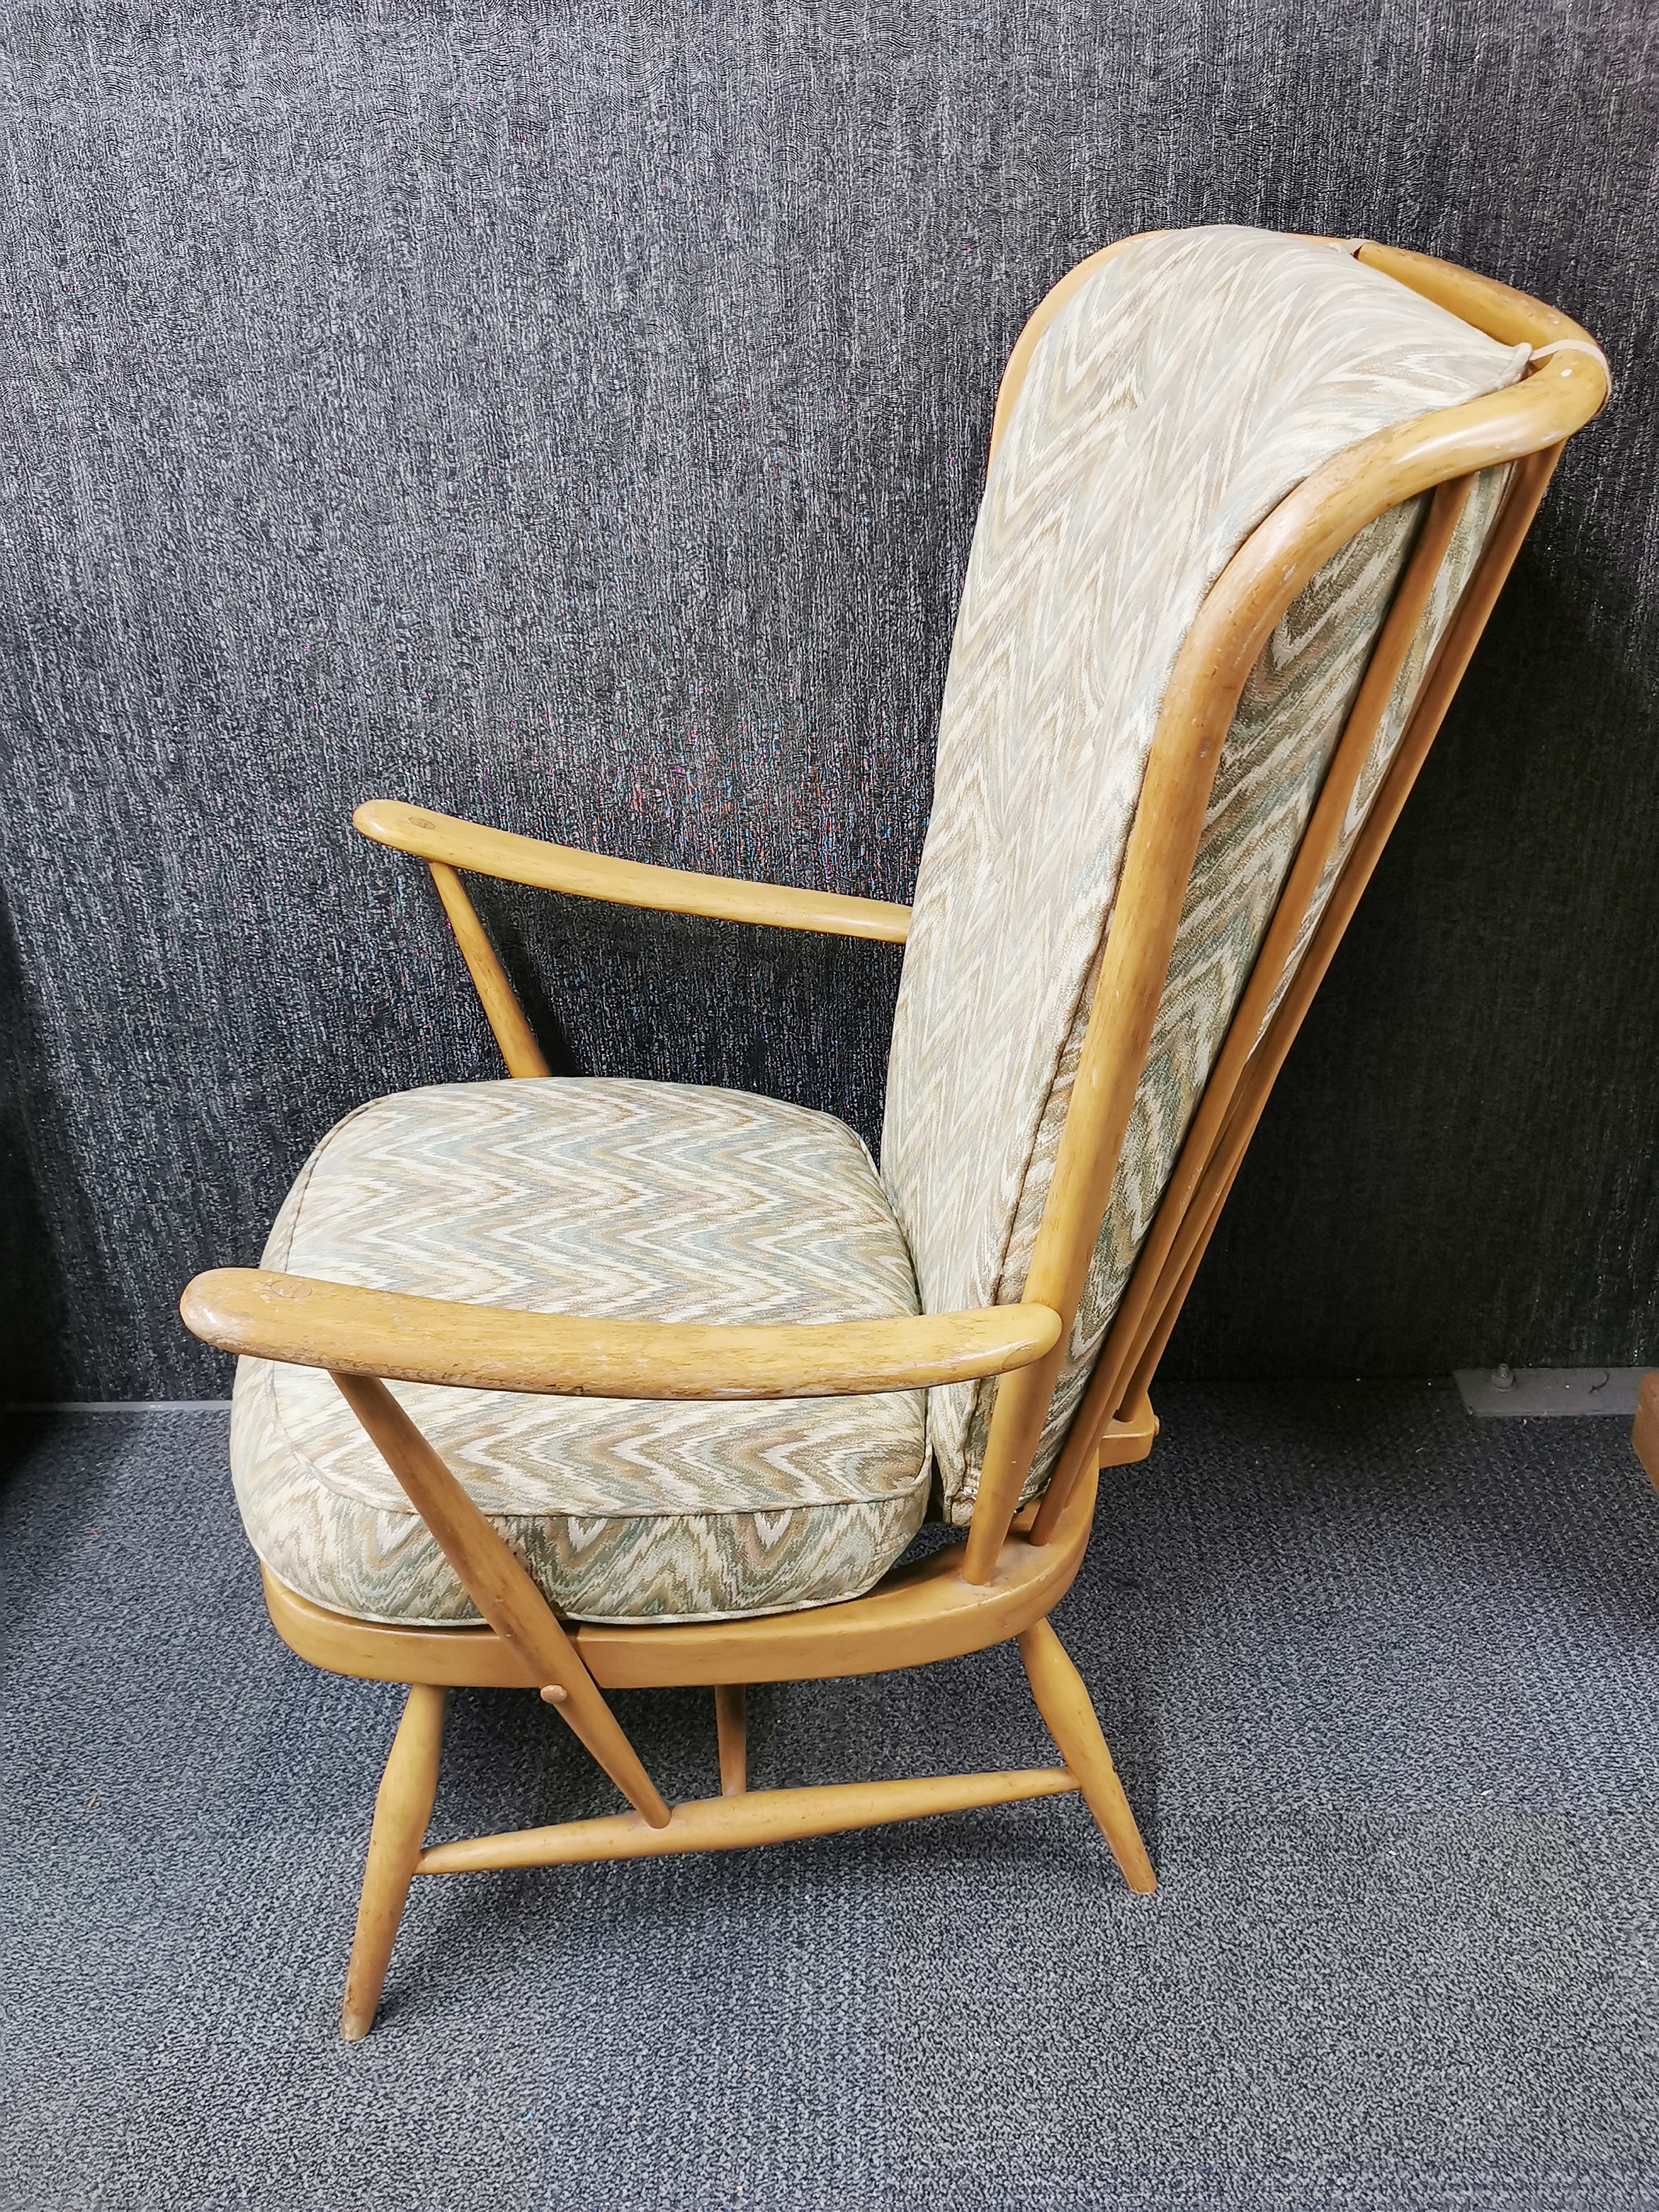 An Ercol cottage style armchair. - Image 2 of 3